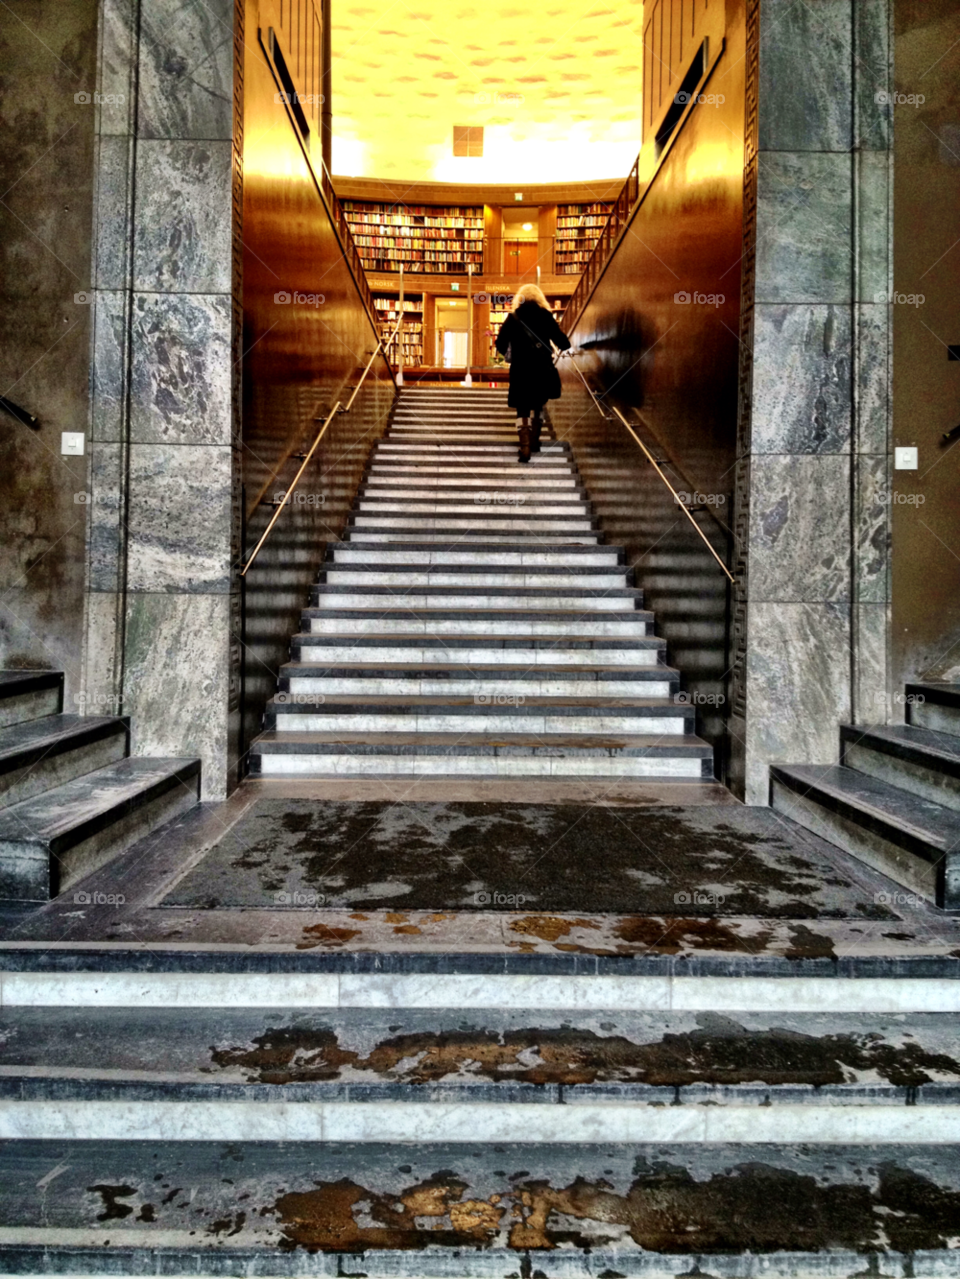 stockholm stairs stairway library by carina71